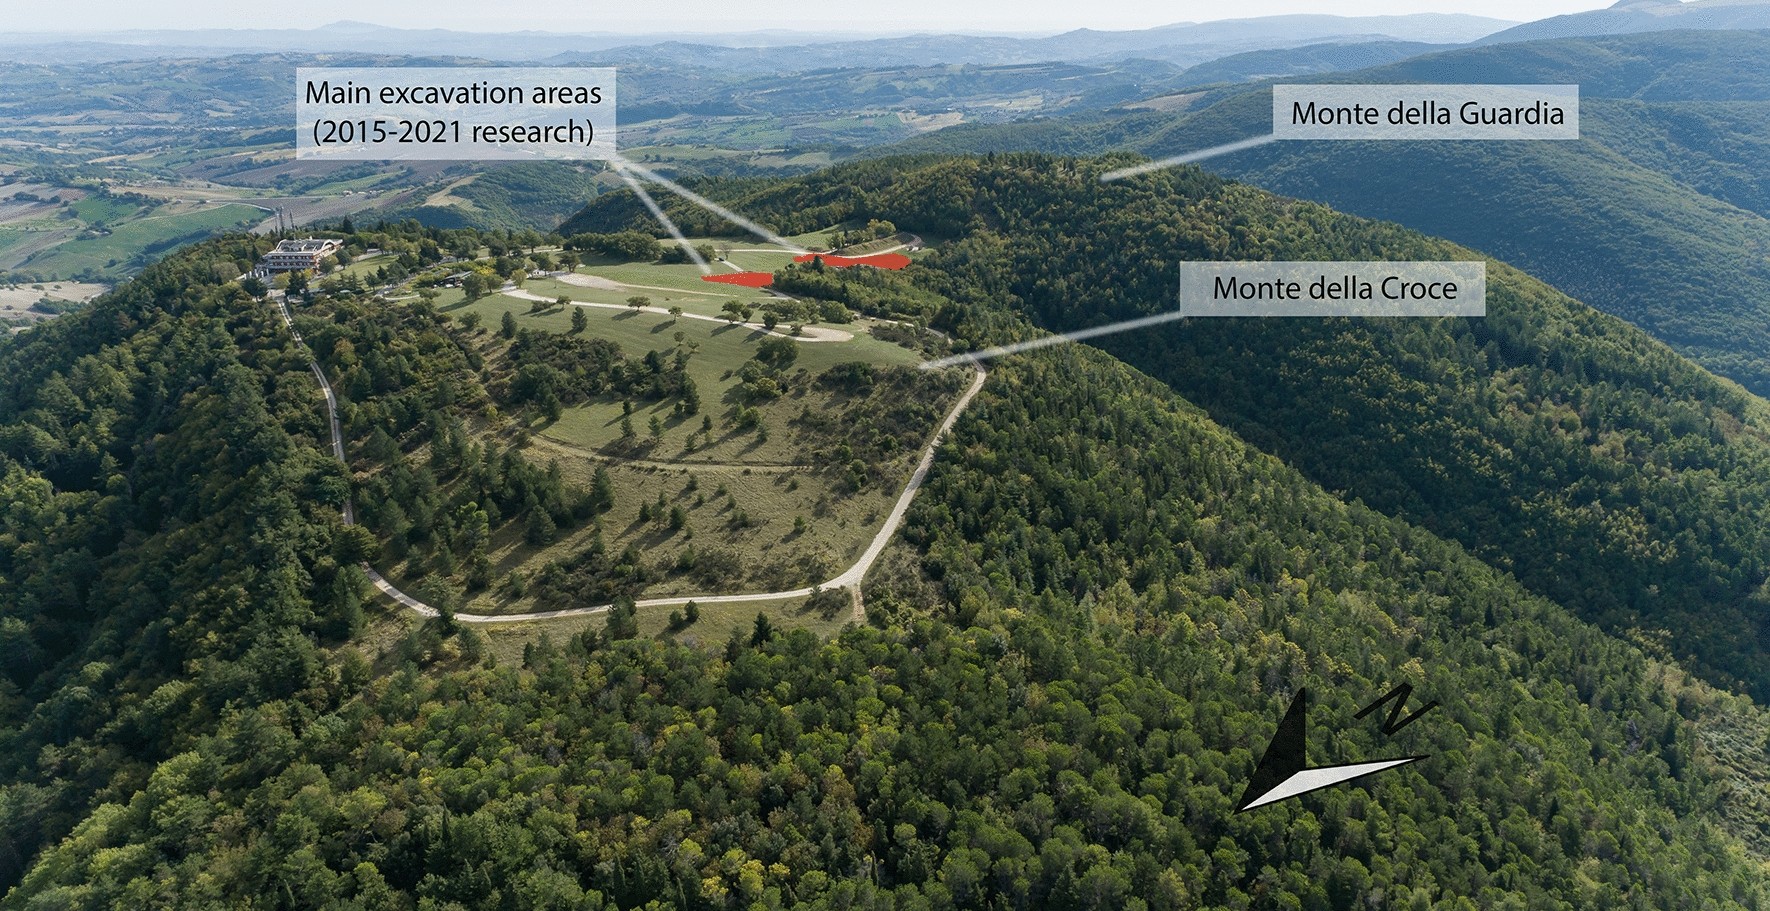 Tracing the human movements of three thousand years ago by volcanic grinding tools in the Final Bronze Age settlement of Monte Croce Guardia (Arcevia-Marche Region, central Reports